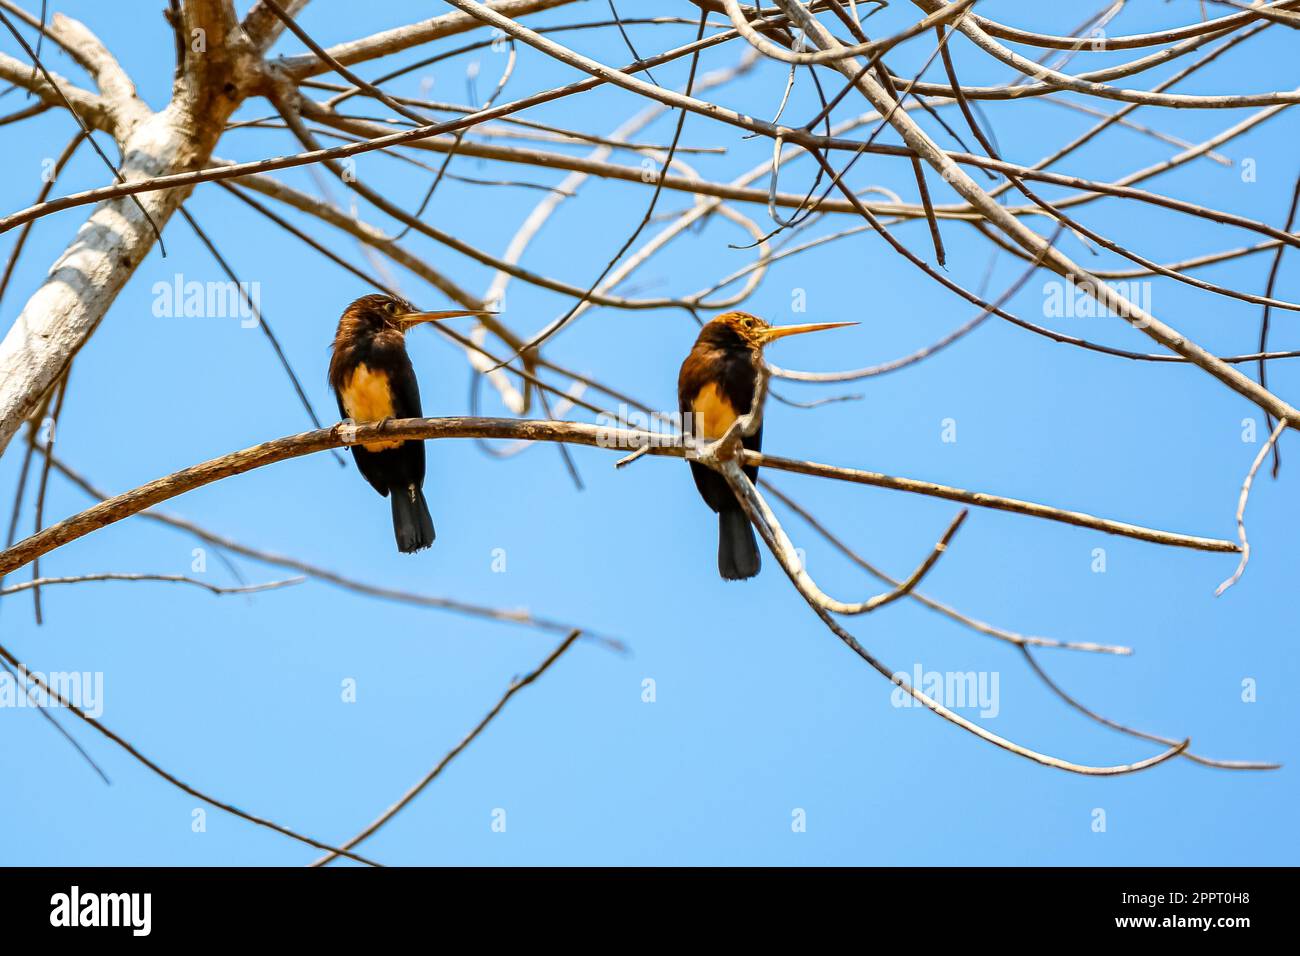 Two Brown jacamar perching on a leaveless tree branch against blue sky, Amazonian rainforest, Mato Grosso, Brazil Stock Photo